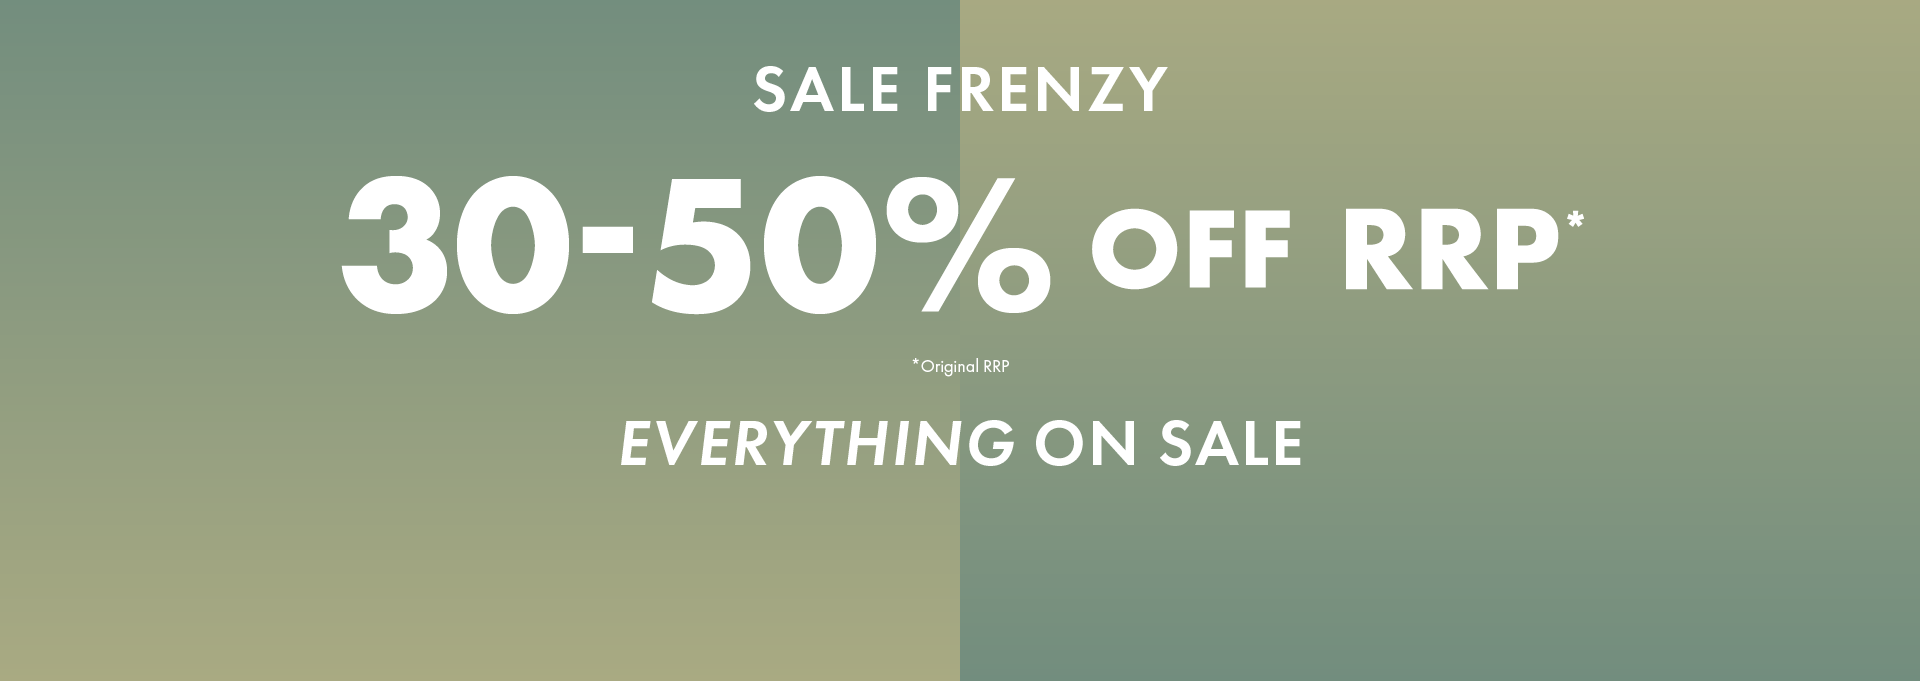 Sale Frenzy - 30% - 50% off RRP